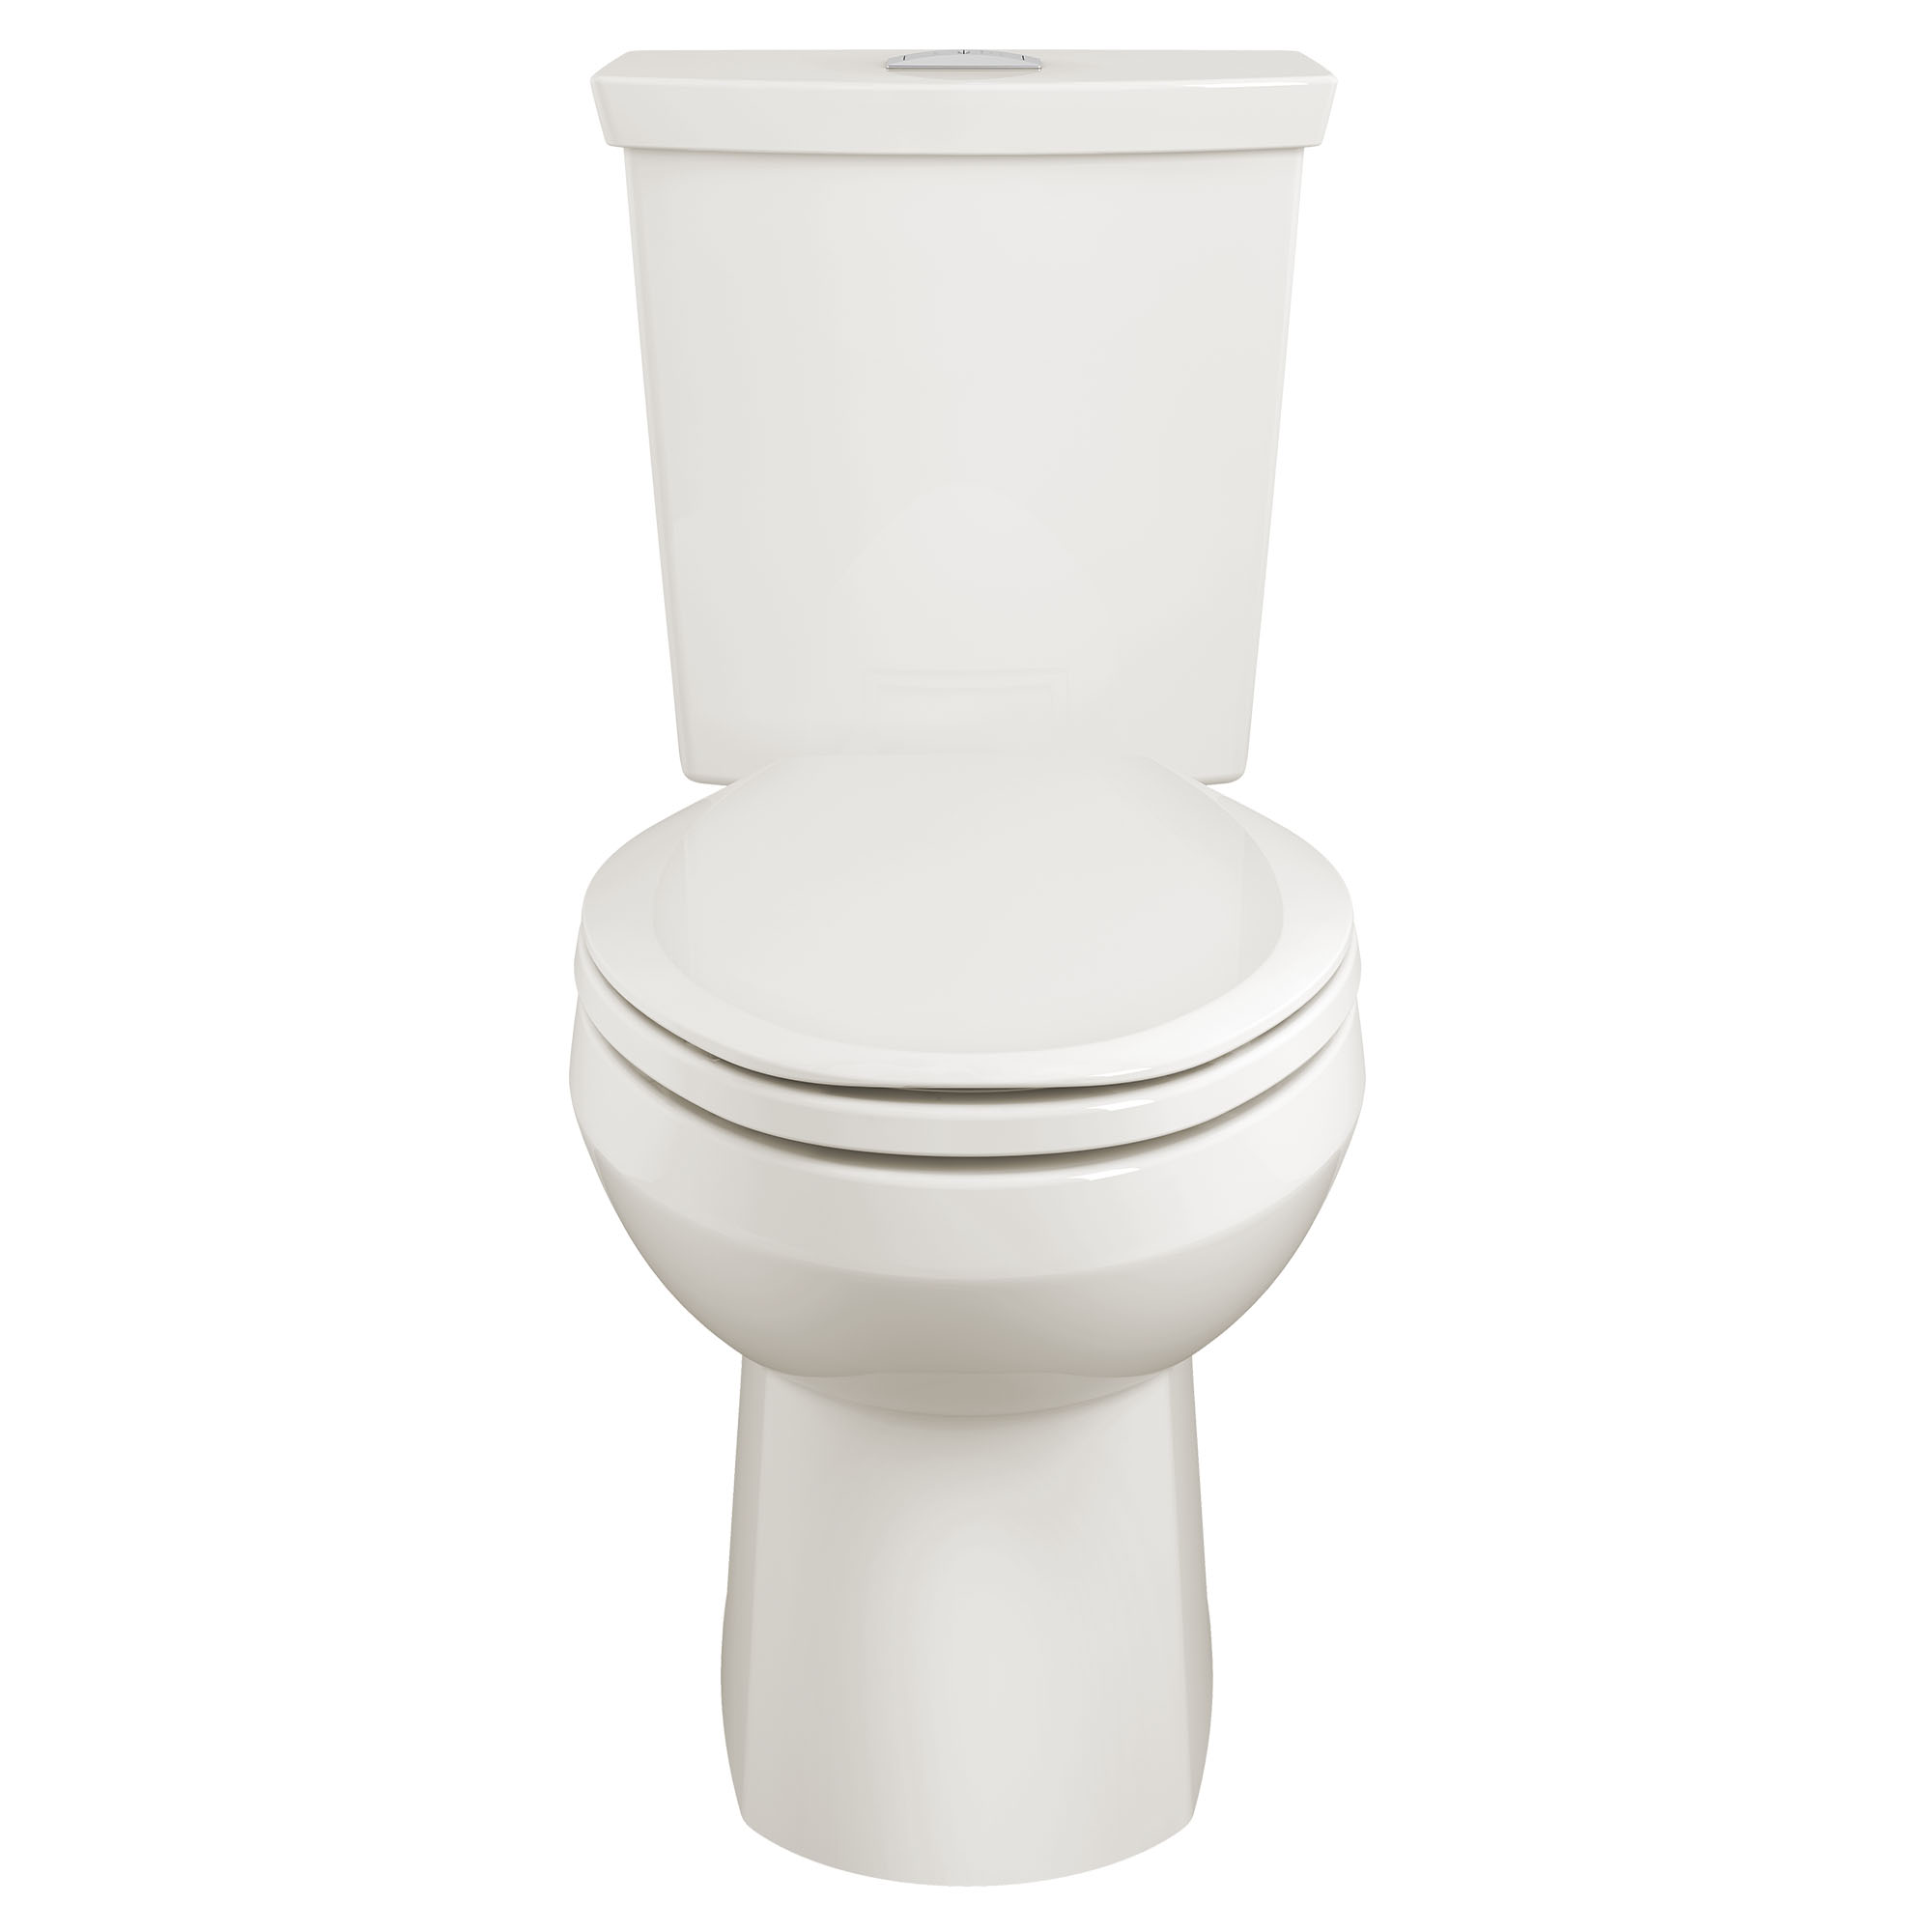 H2Option® Two-Piece Dual Flush 1.28 gpf/4.8 Lpf and 0.92 gpf/3.5 Lpf Standard Height Elongated Toilet Less Seat